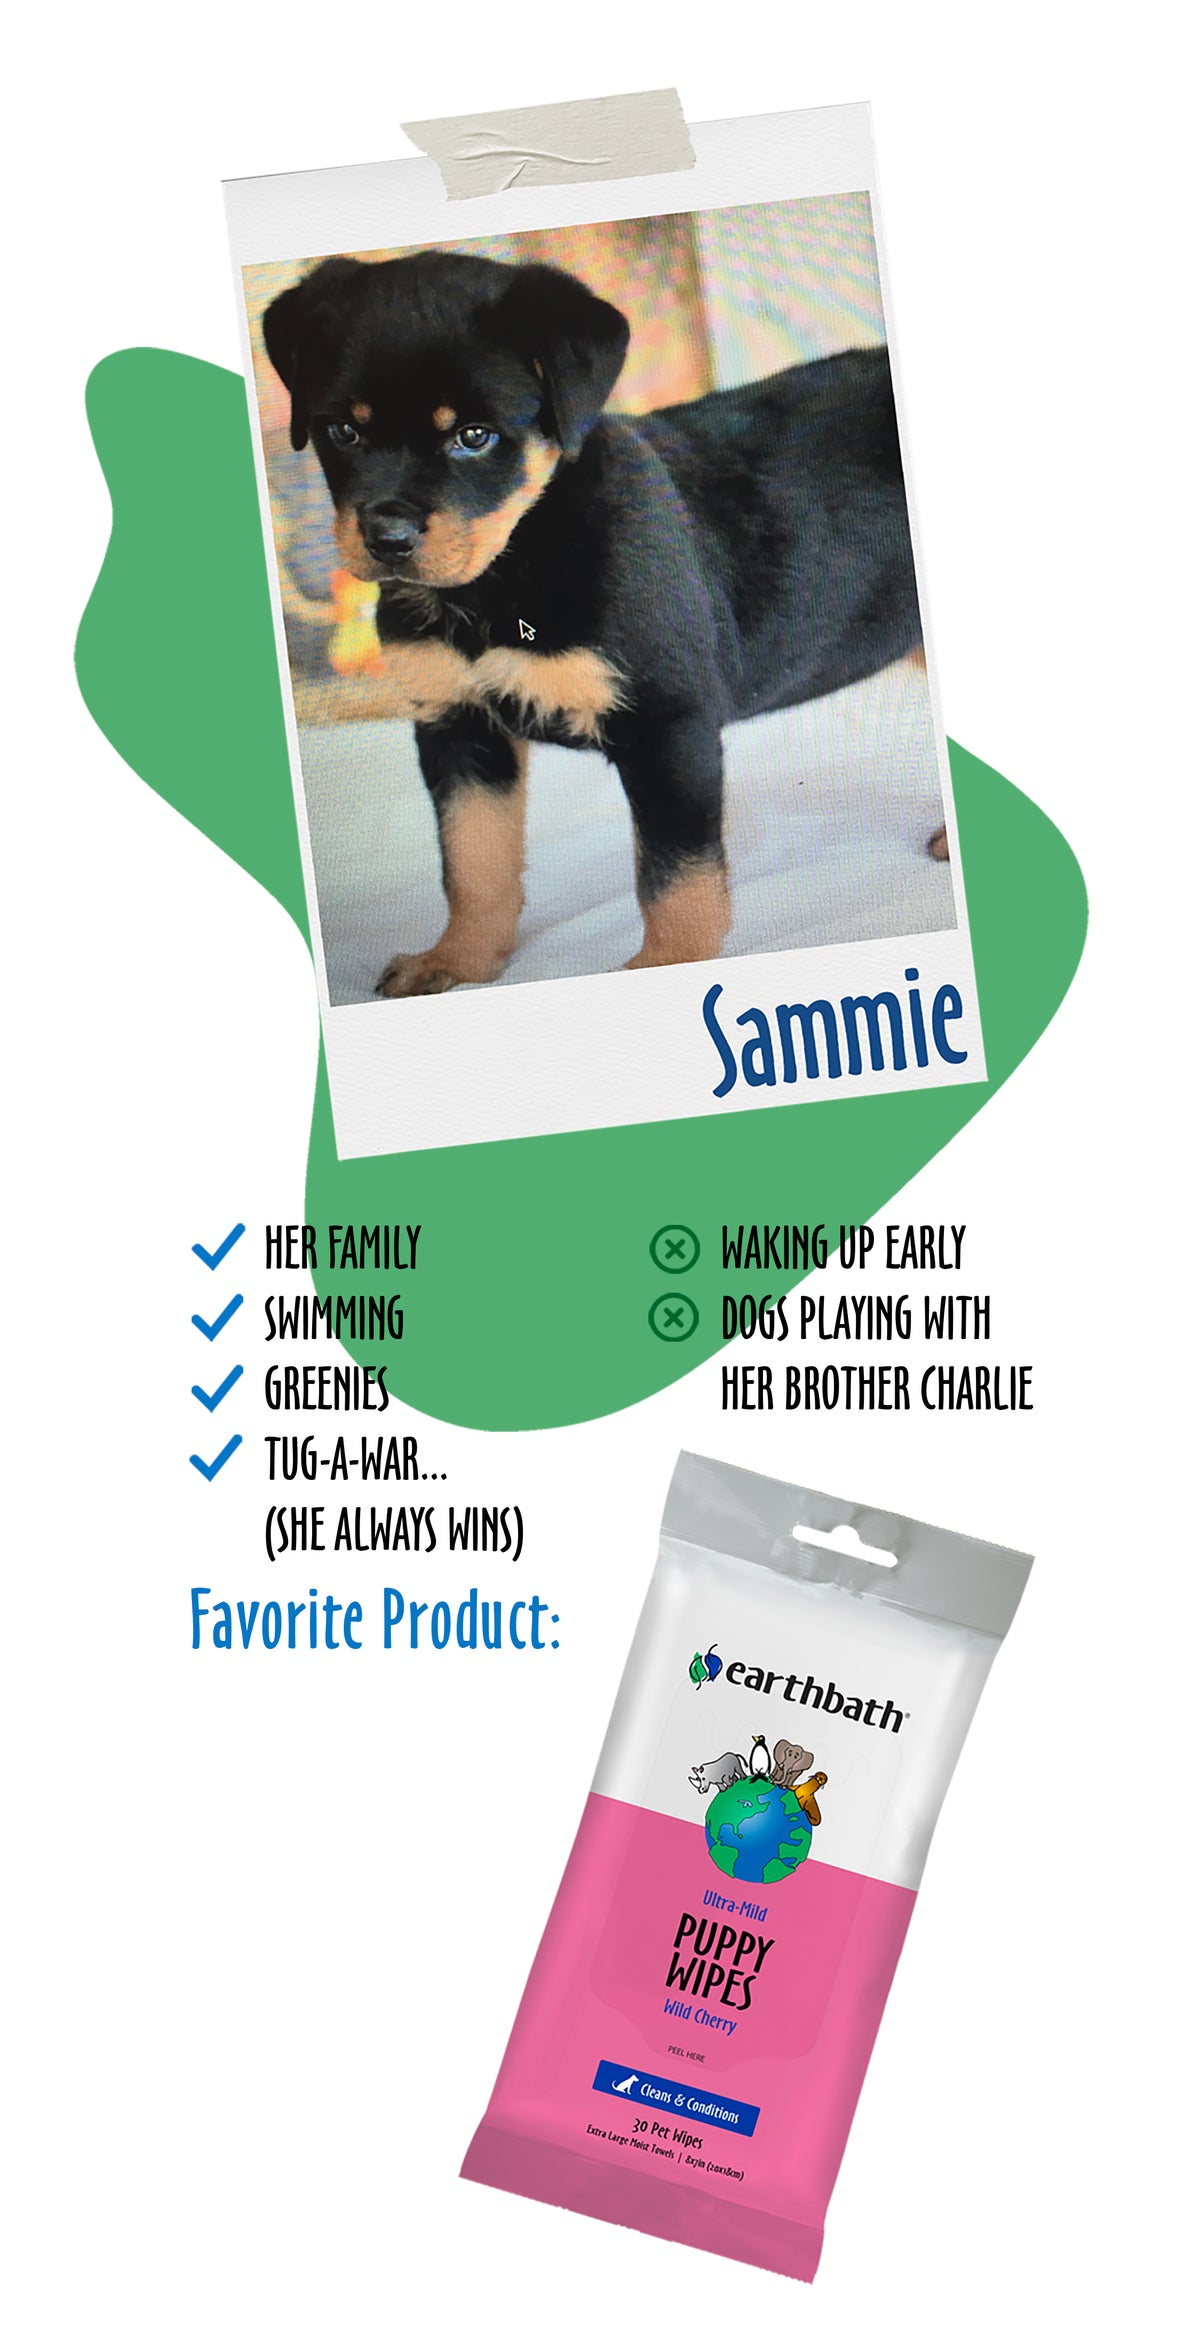 Sammie loves Ultra-Mild Puppy Grooming Wipes